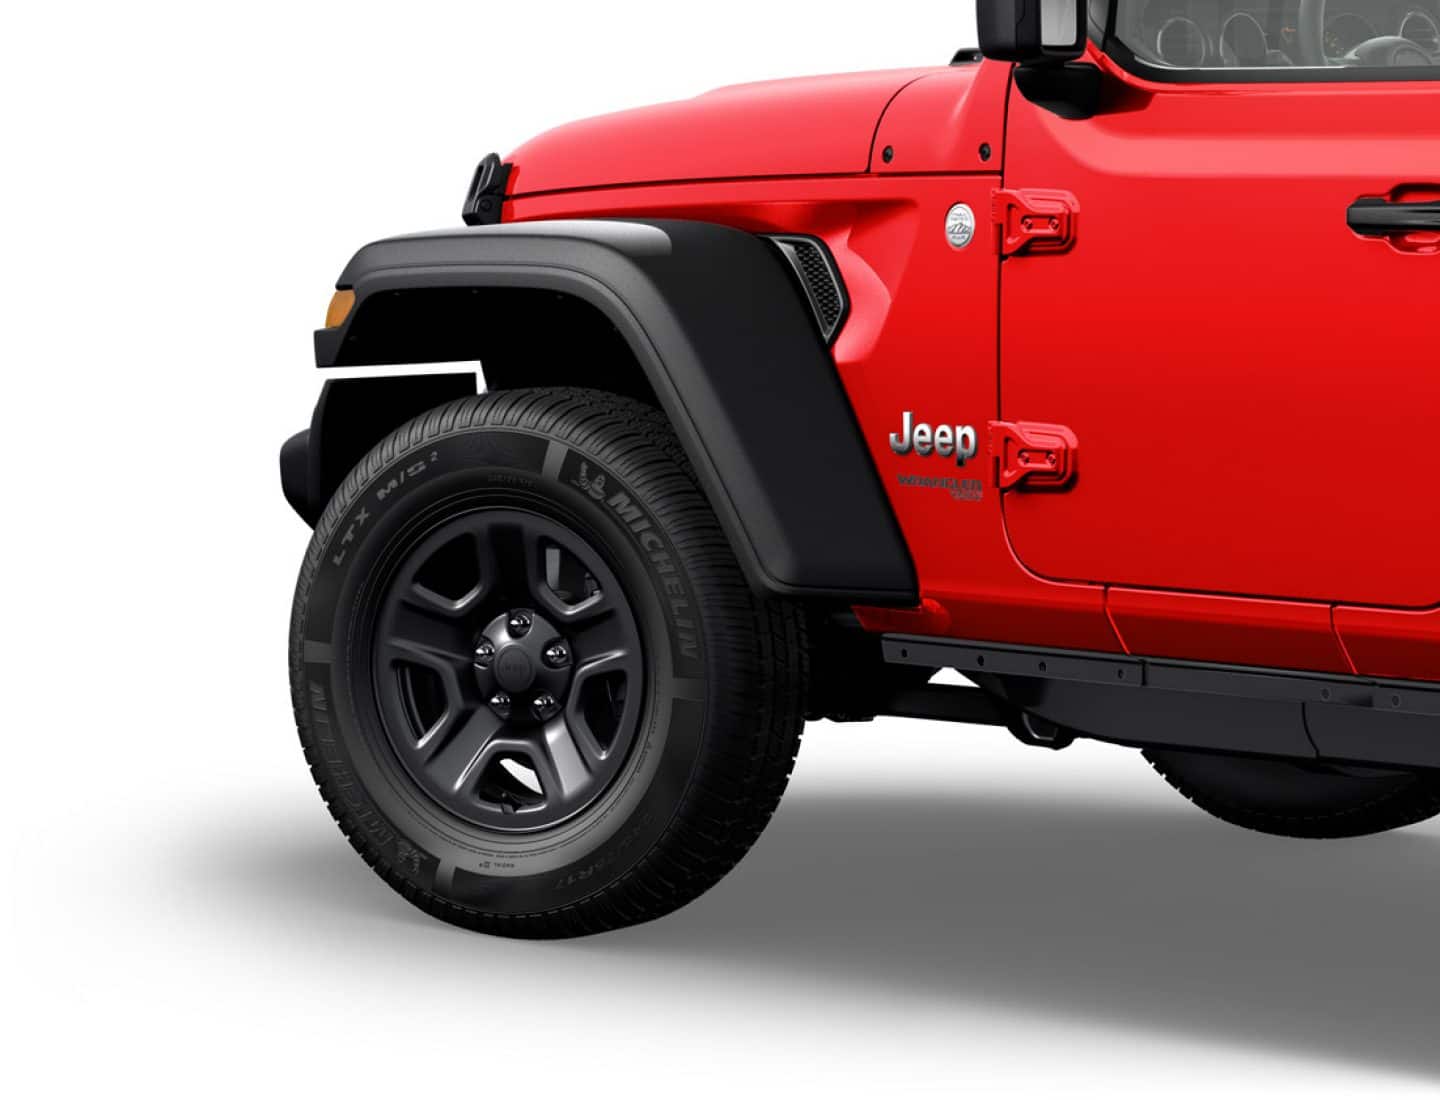 2019 Jeep Wrangler - Rugged Exterior Features